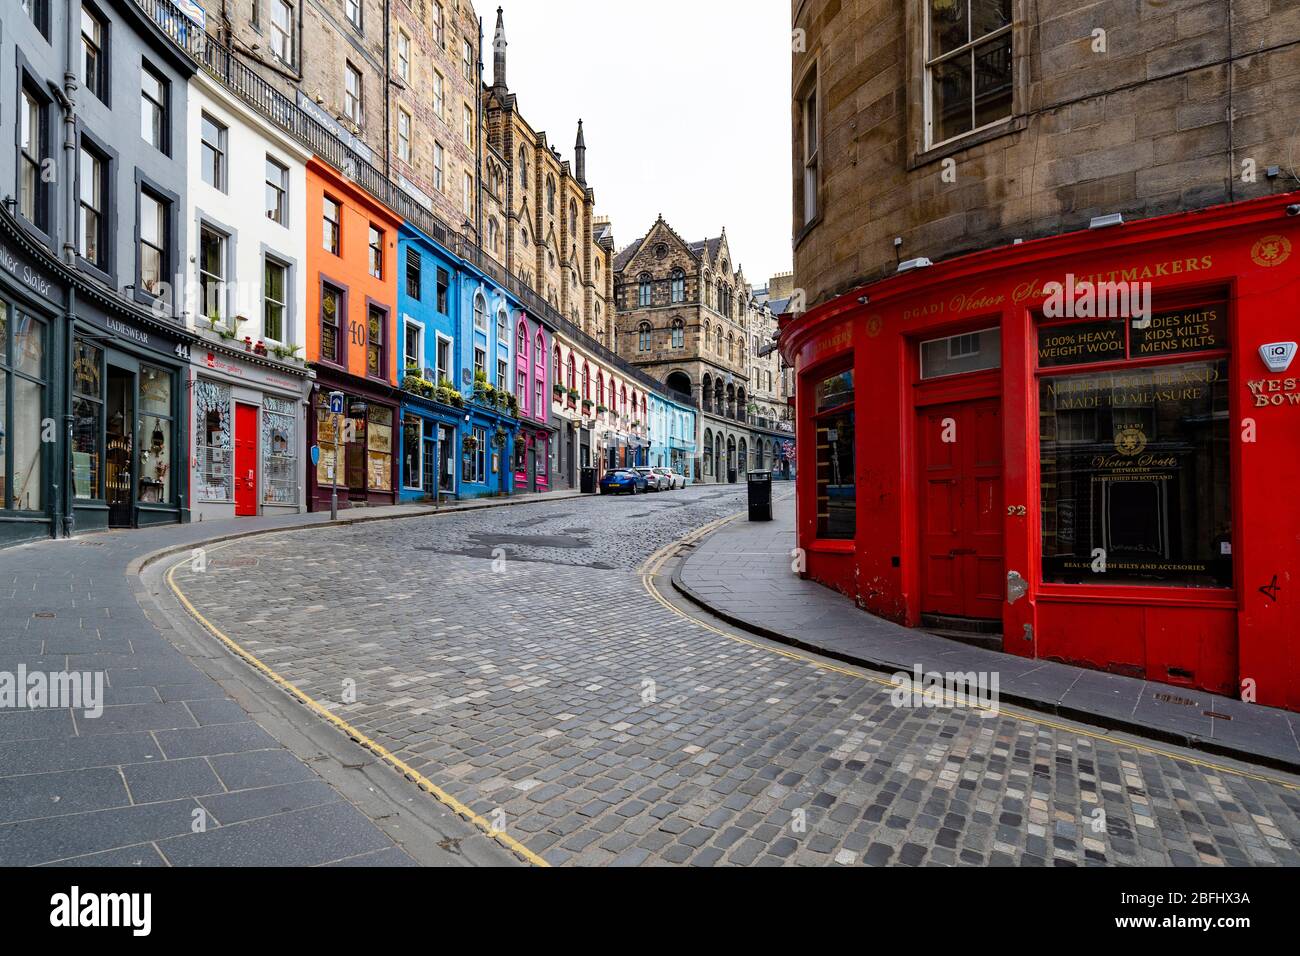 Edinburgh, Scotland, UK. 18 April 2020. Views of empty streets and members of the public outside on another Saturday during the coronavirus lockdown in Edinburgh. Shops and restaurants on Victoria Street are closed and street deserted. Iain Masterton/Alamy Live News Stock Photo